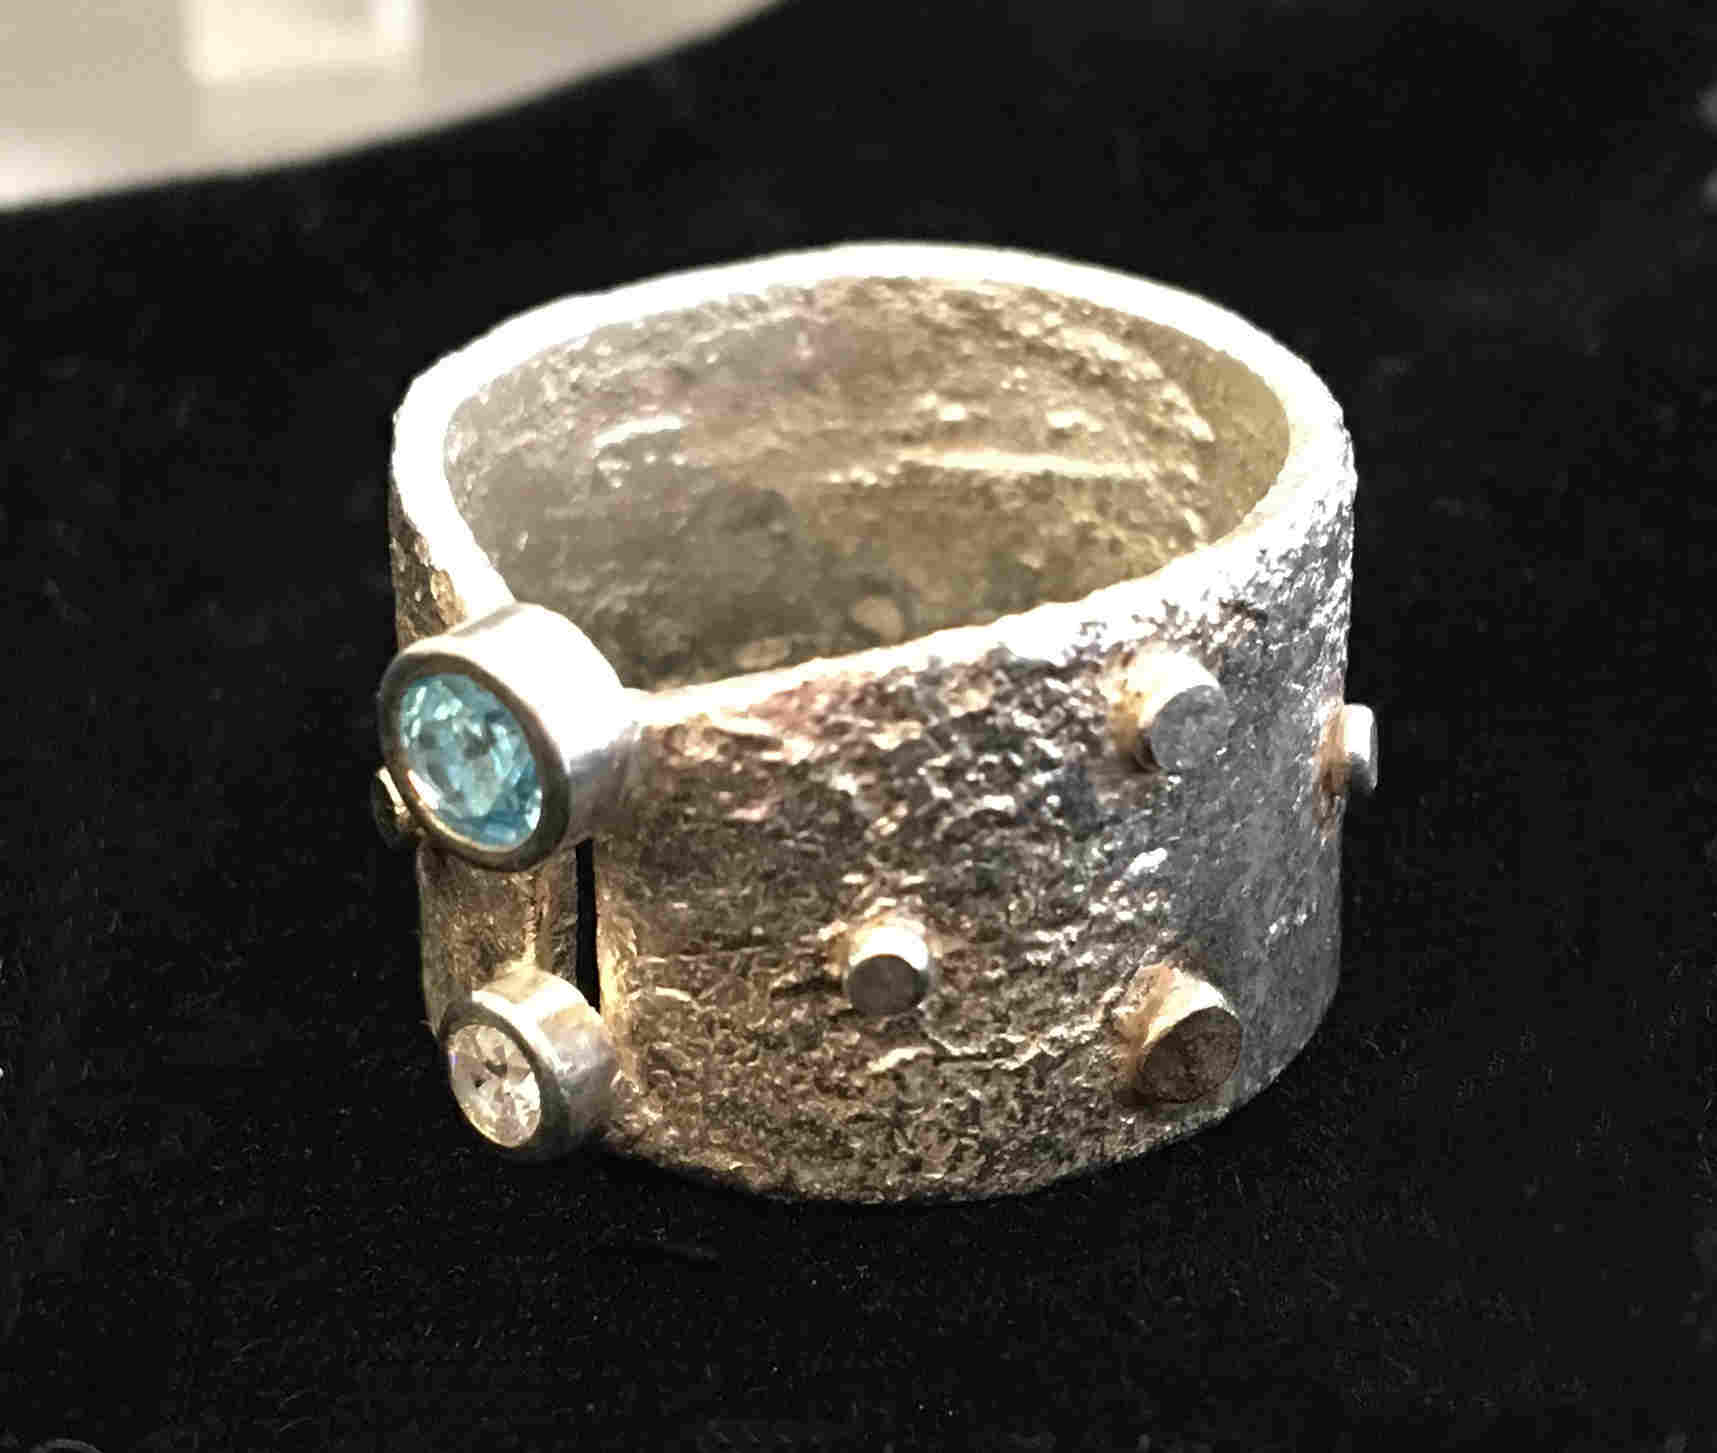 'Sterling Silver reticulated Ring with 1 Clear stone, 1 Swiss Blue Topaz and 9ct Gold Detail' by artist Carol Docherty